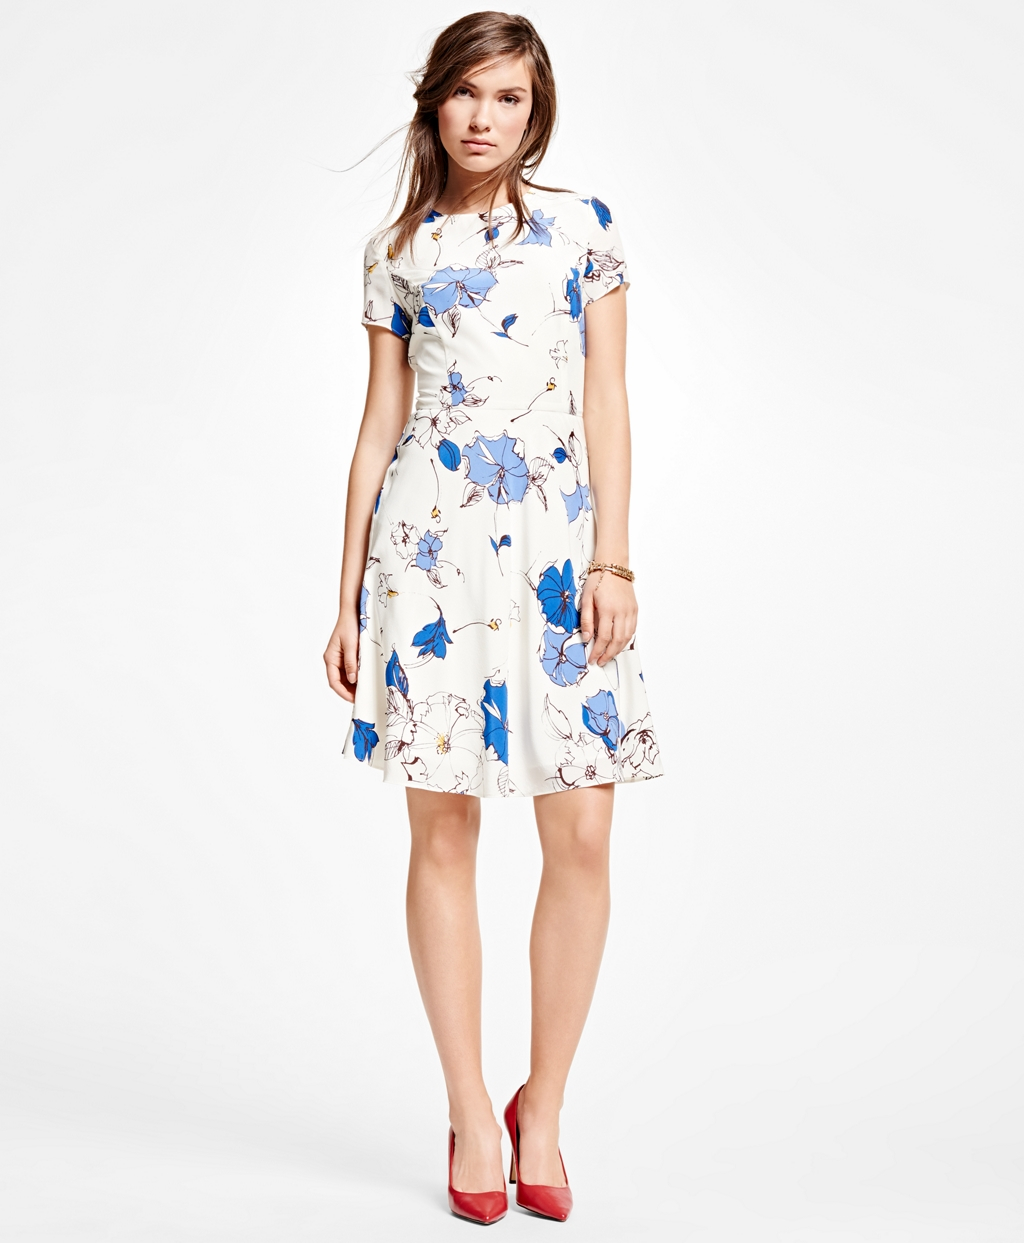 Lyst - Brooks Brothers Silk Floral Dress in White